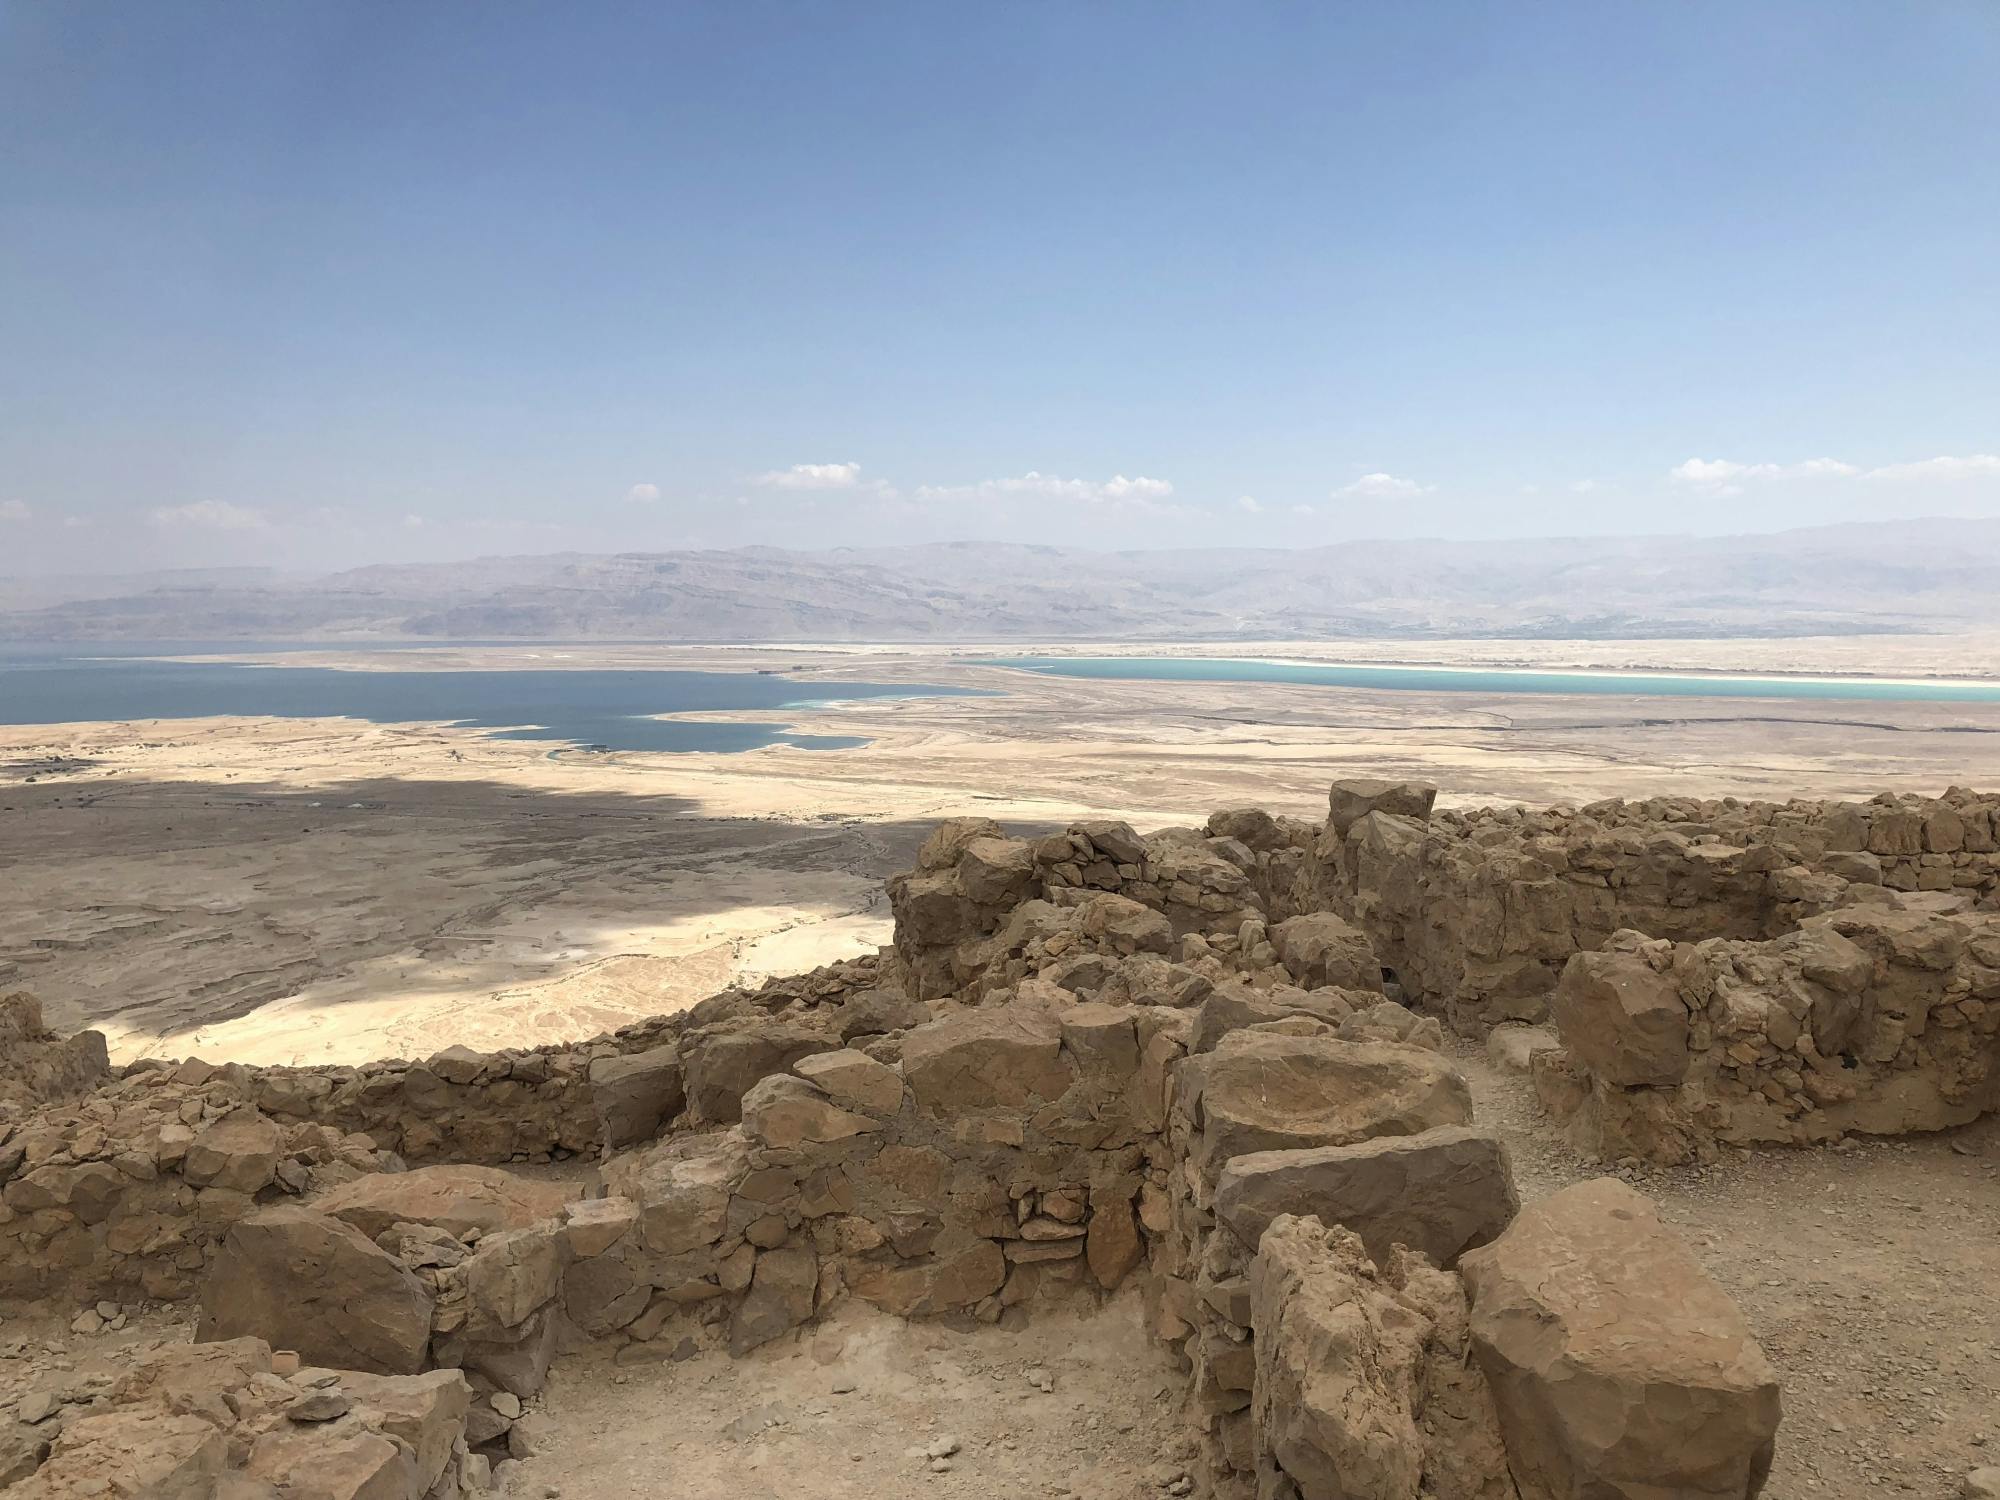 From Jerusalem full day guided tour of Masada Ein Gedi and the Dead